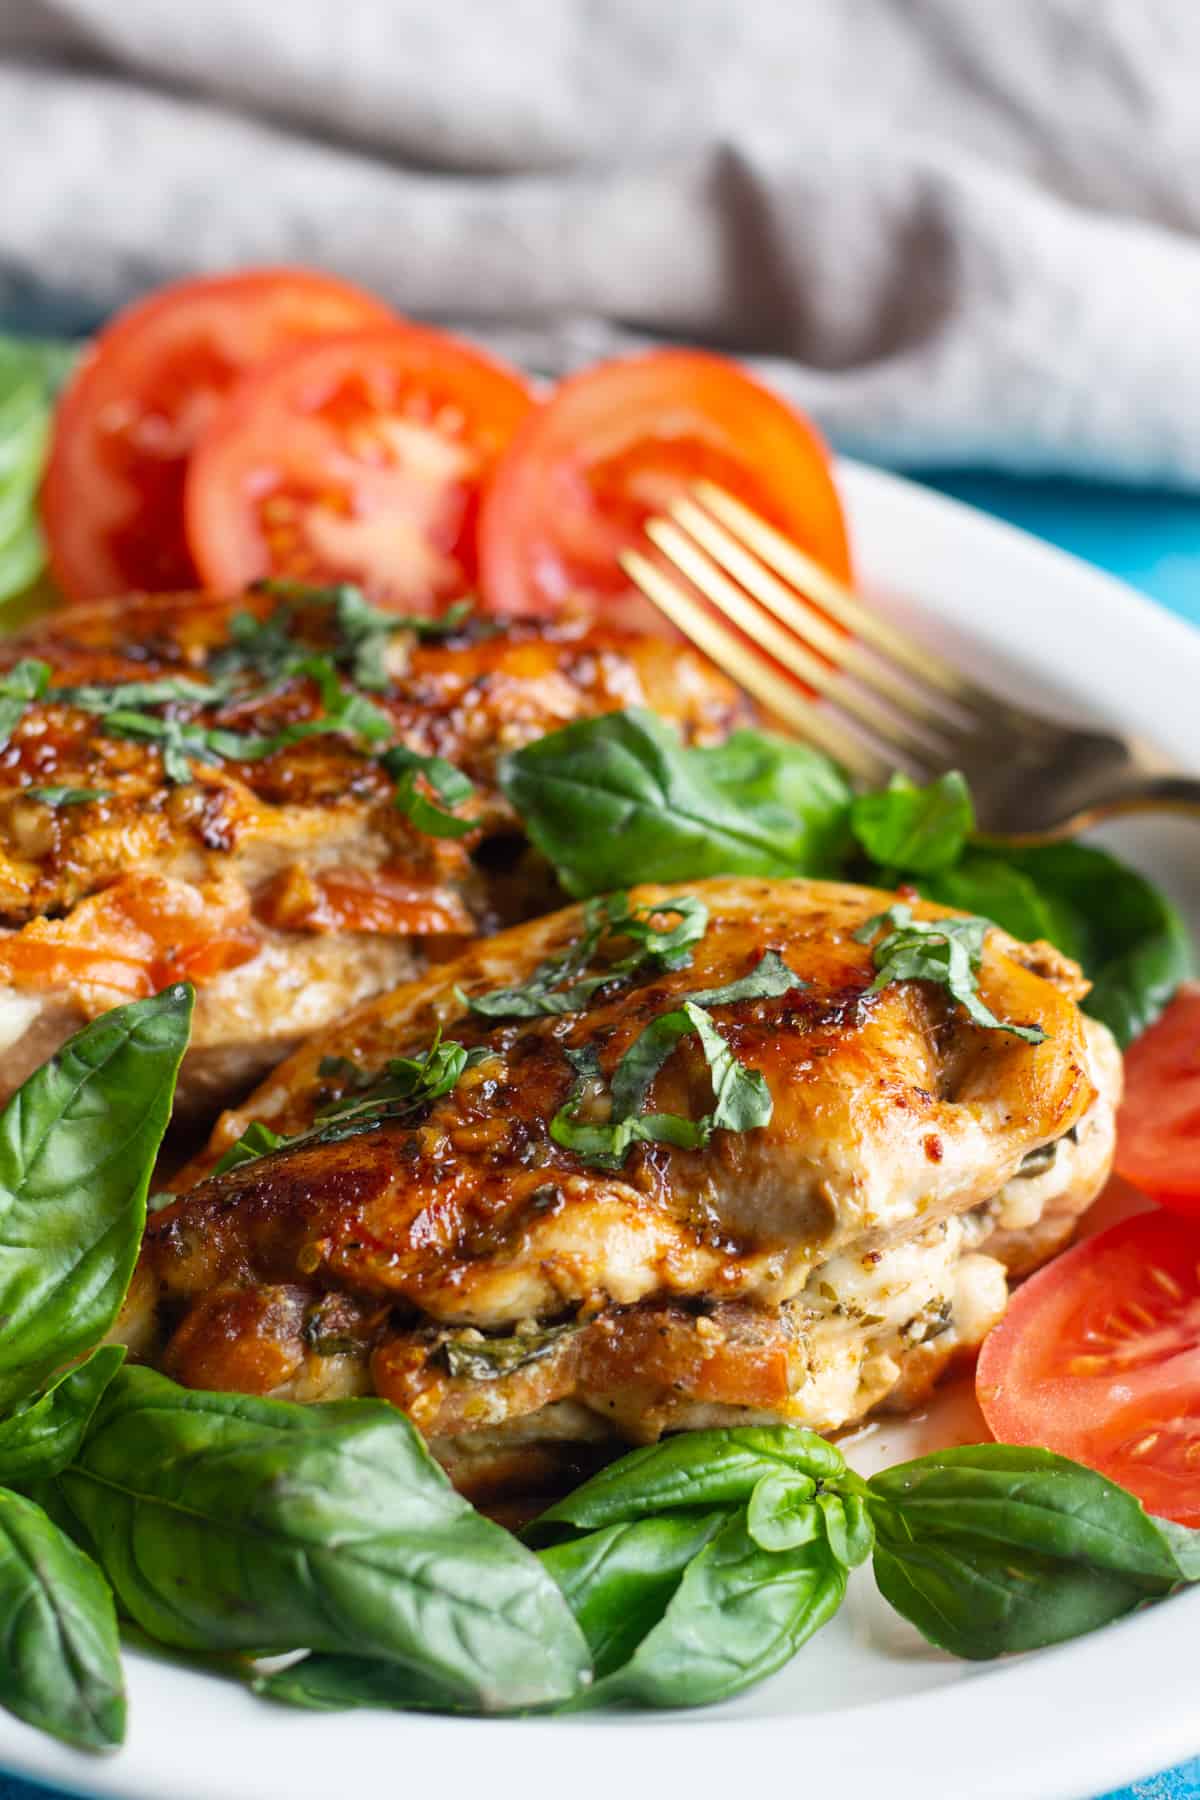 Caprese stuffed chicken breast is easy and packed with flavor. Juicy chicken breast stuffed with cheese, tomatoes and basil makes a delicious meal. 